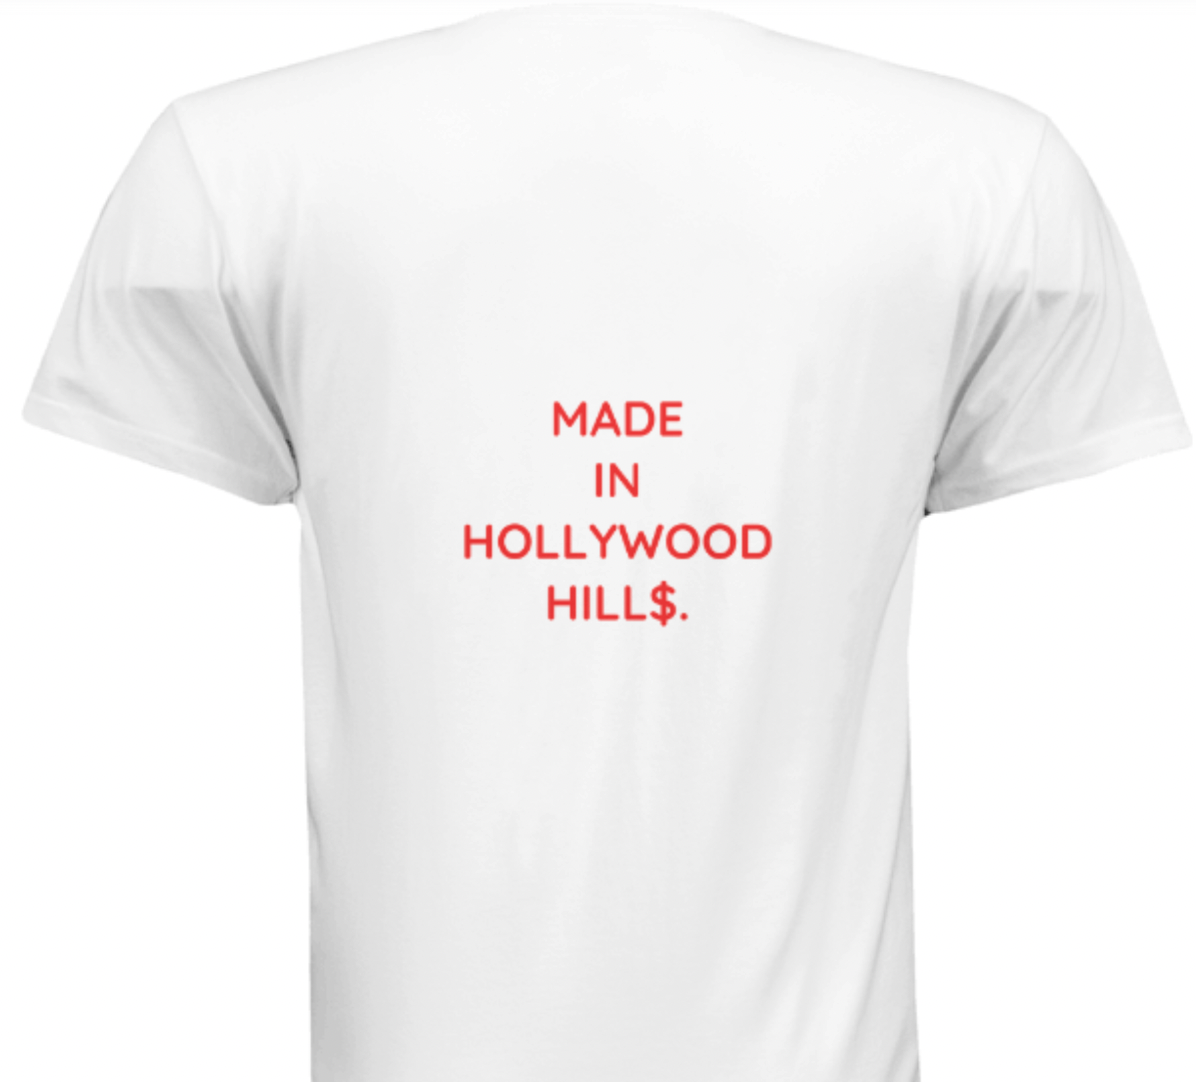 POSSY T-SHIRT (HOLLYWOOD HILL$ EDITION)